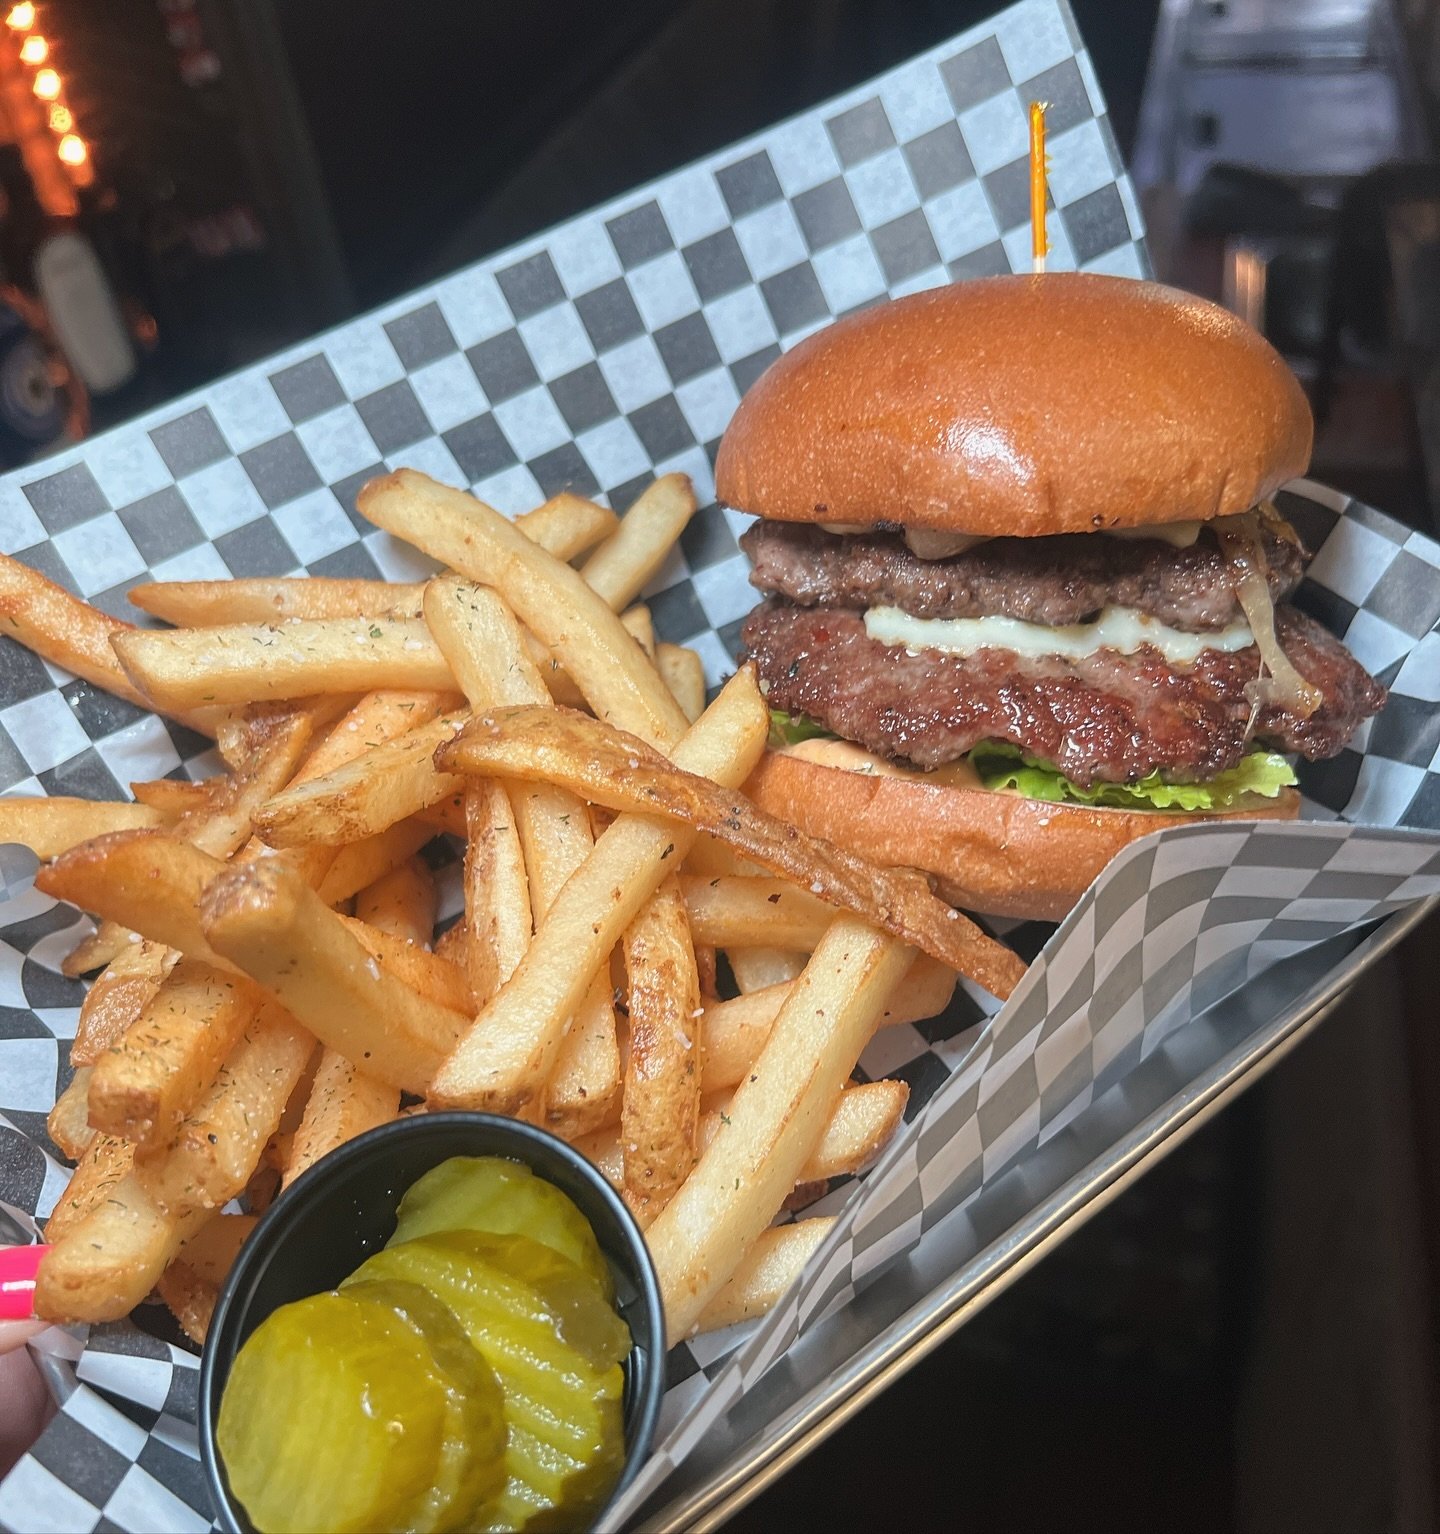 The sun is shinning &amp; it&rsquo;s Friday Eve! Come have dinner on the patio! $10 Smashburgers from 4-6pm during Happy Hour! 76ers Playoff at 9pm- Playing on our new 86inch TV!